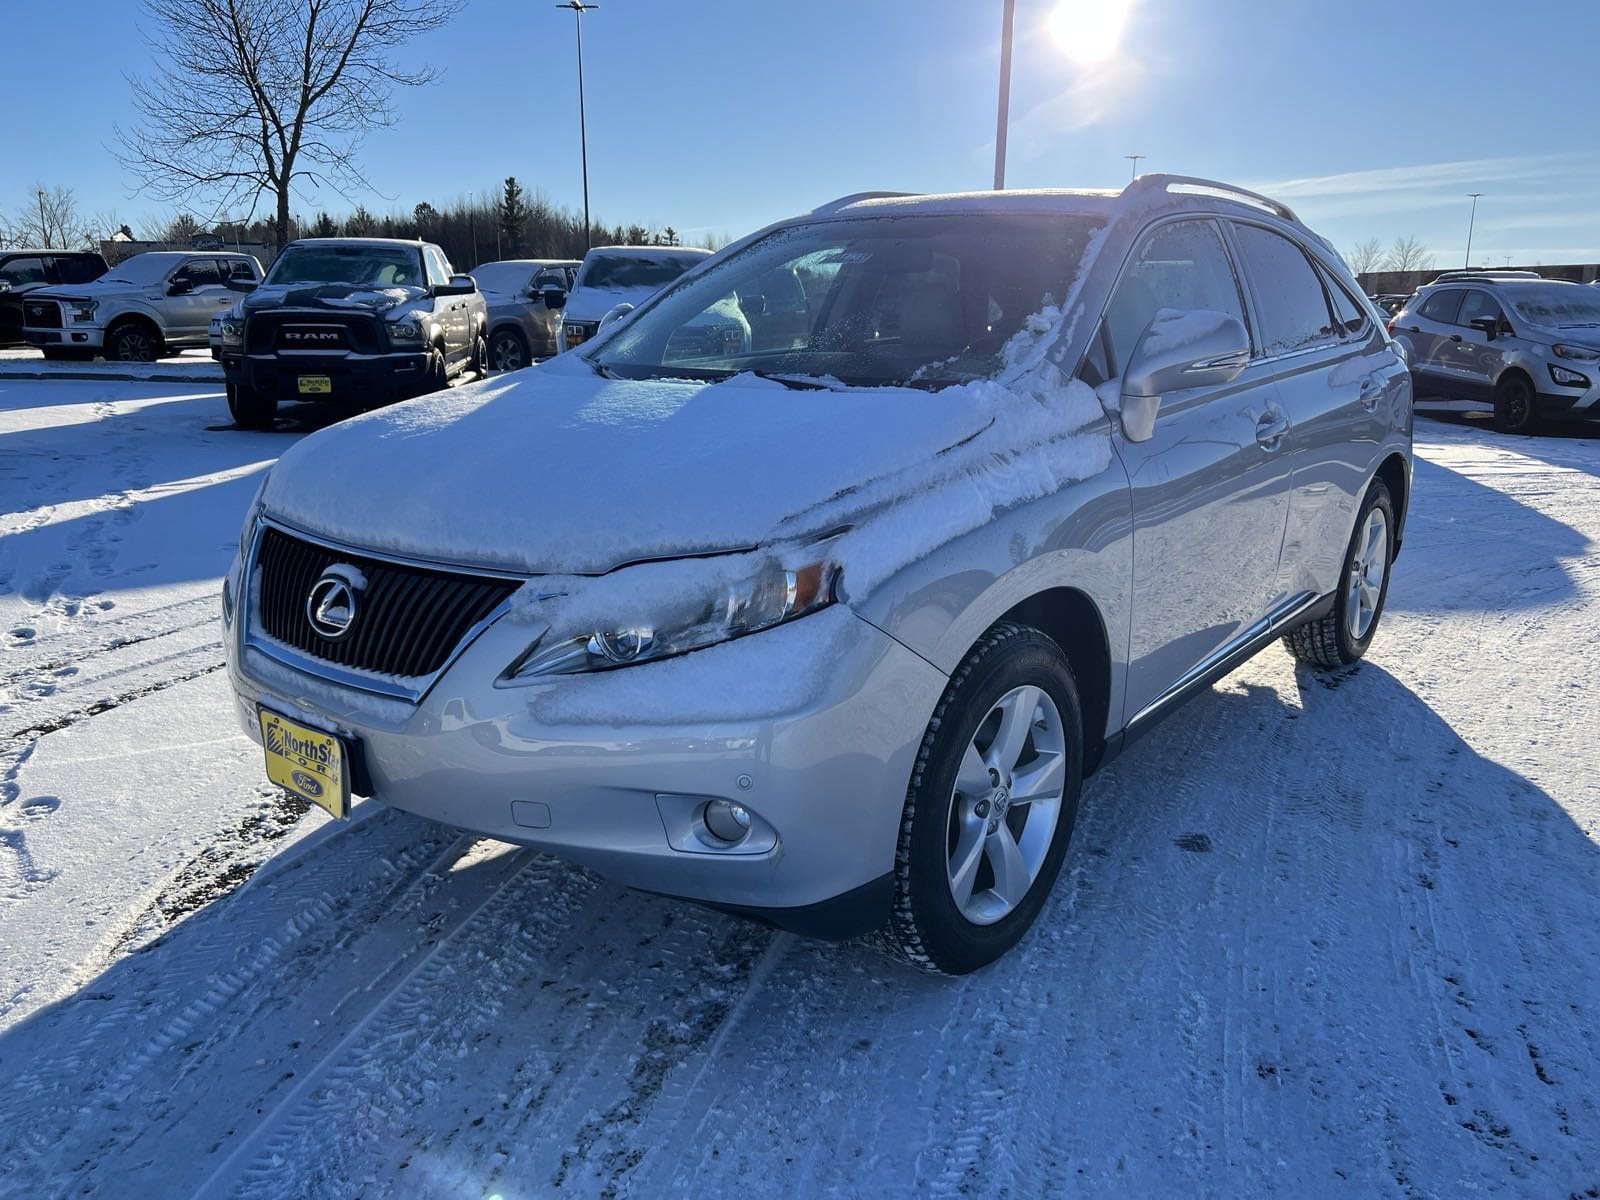 Used 2011 Lexus RX 350 with VIN 2T2BK1BA2BC087239 for sale in Duluth, MN